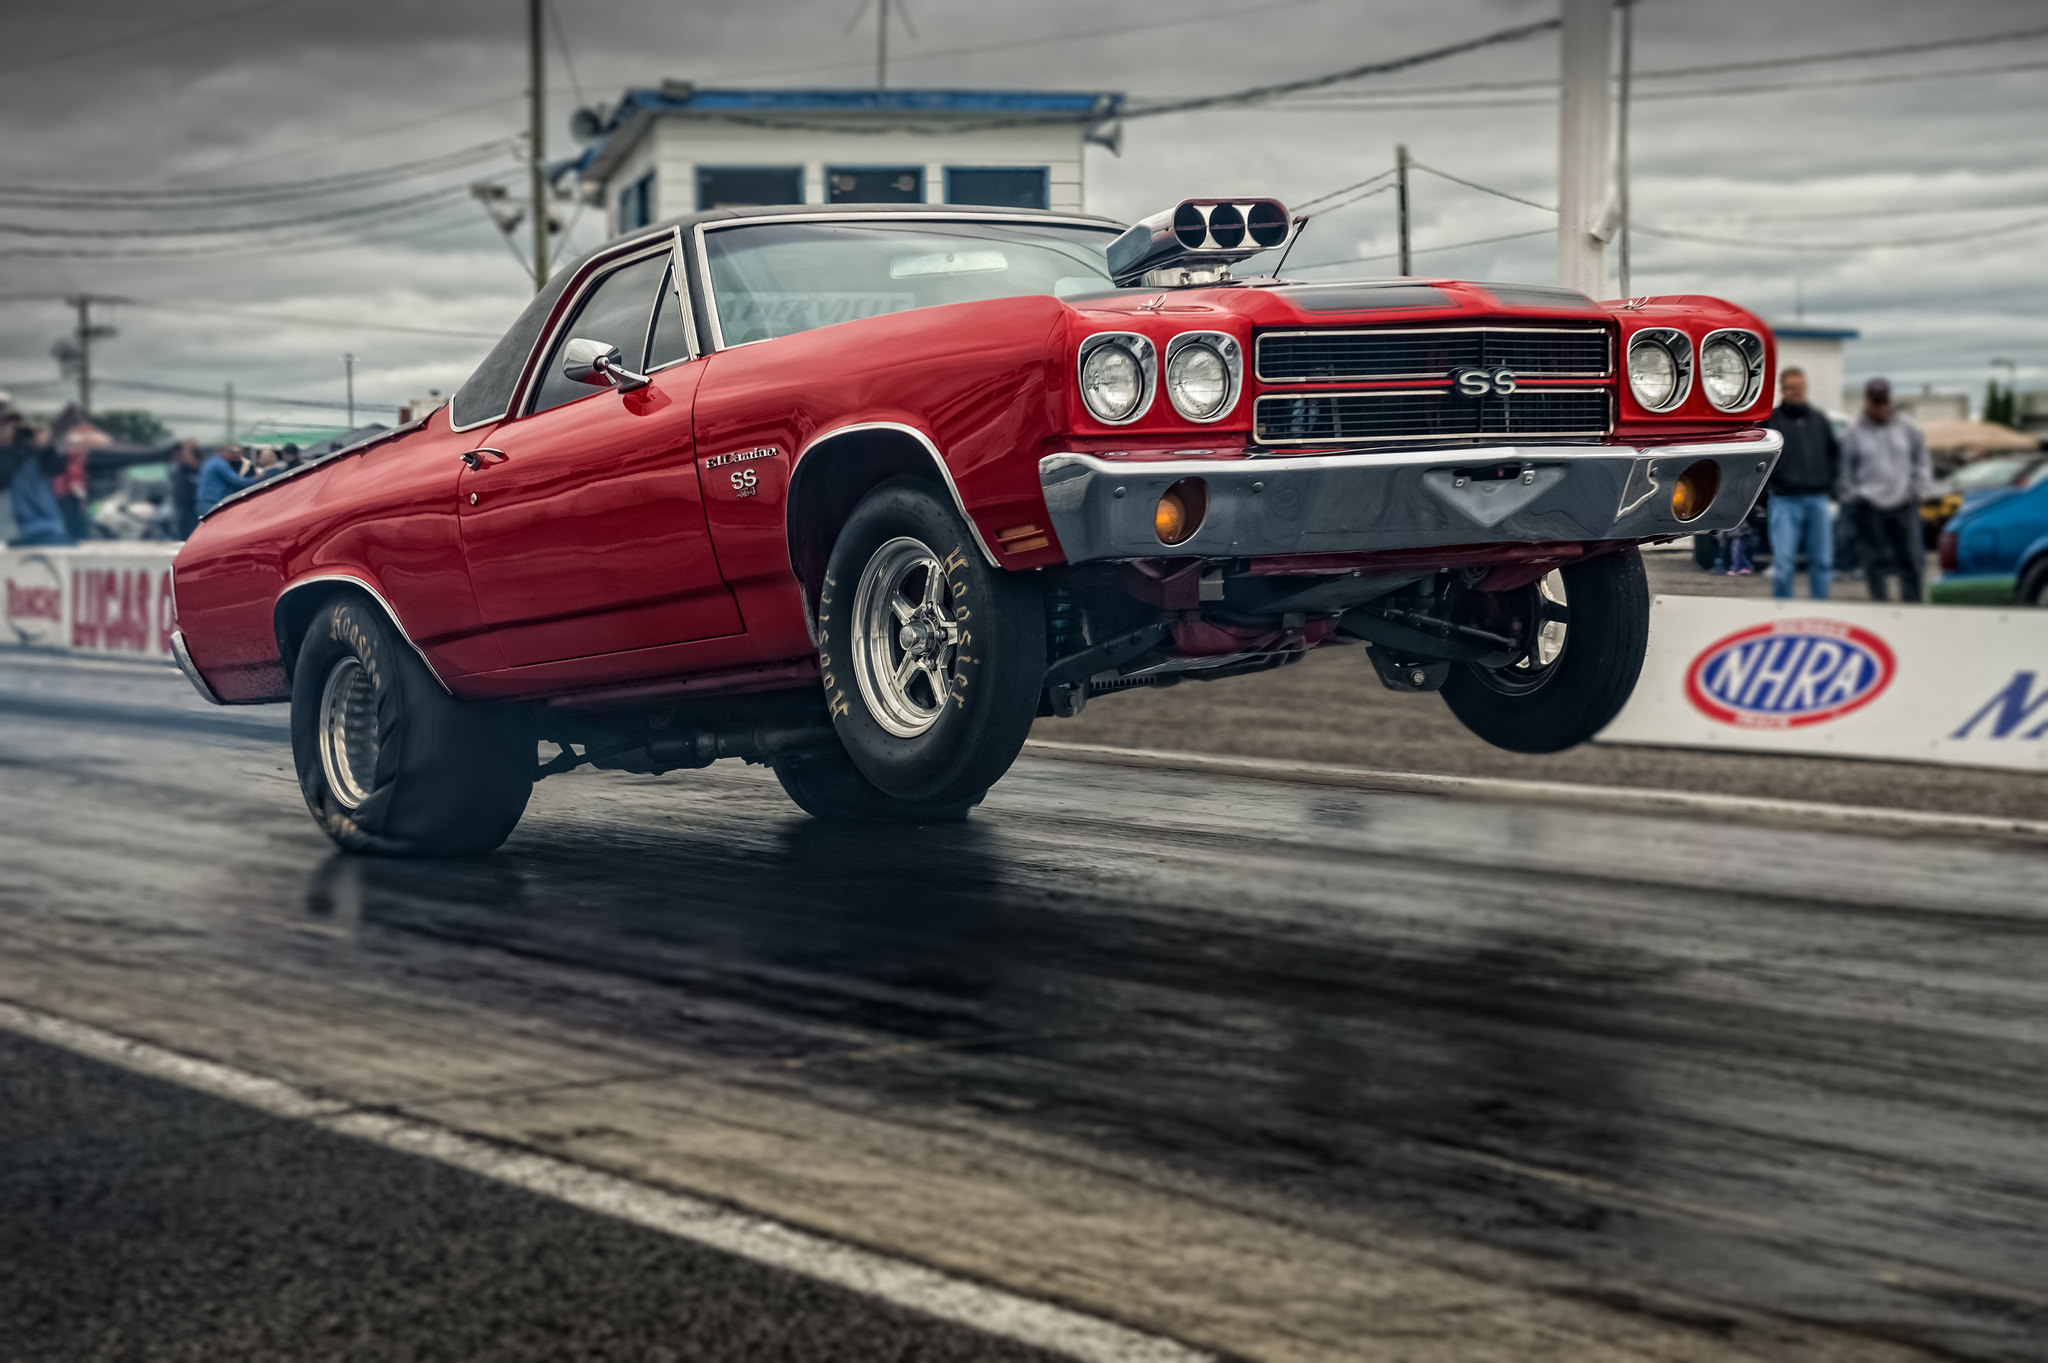  car muscle car drag racing race   car pictures and photos chevrolet